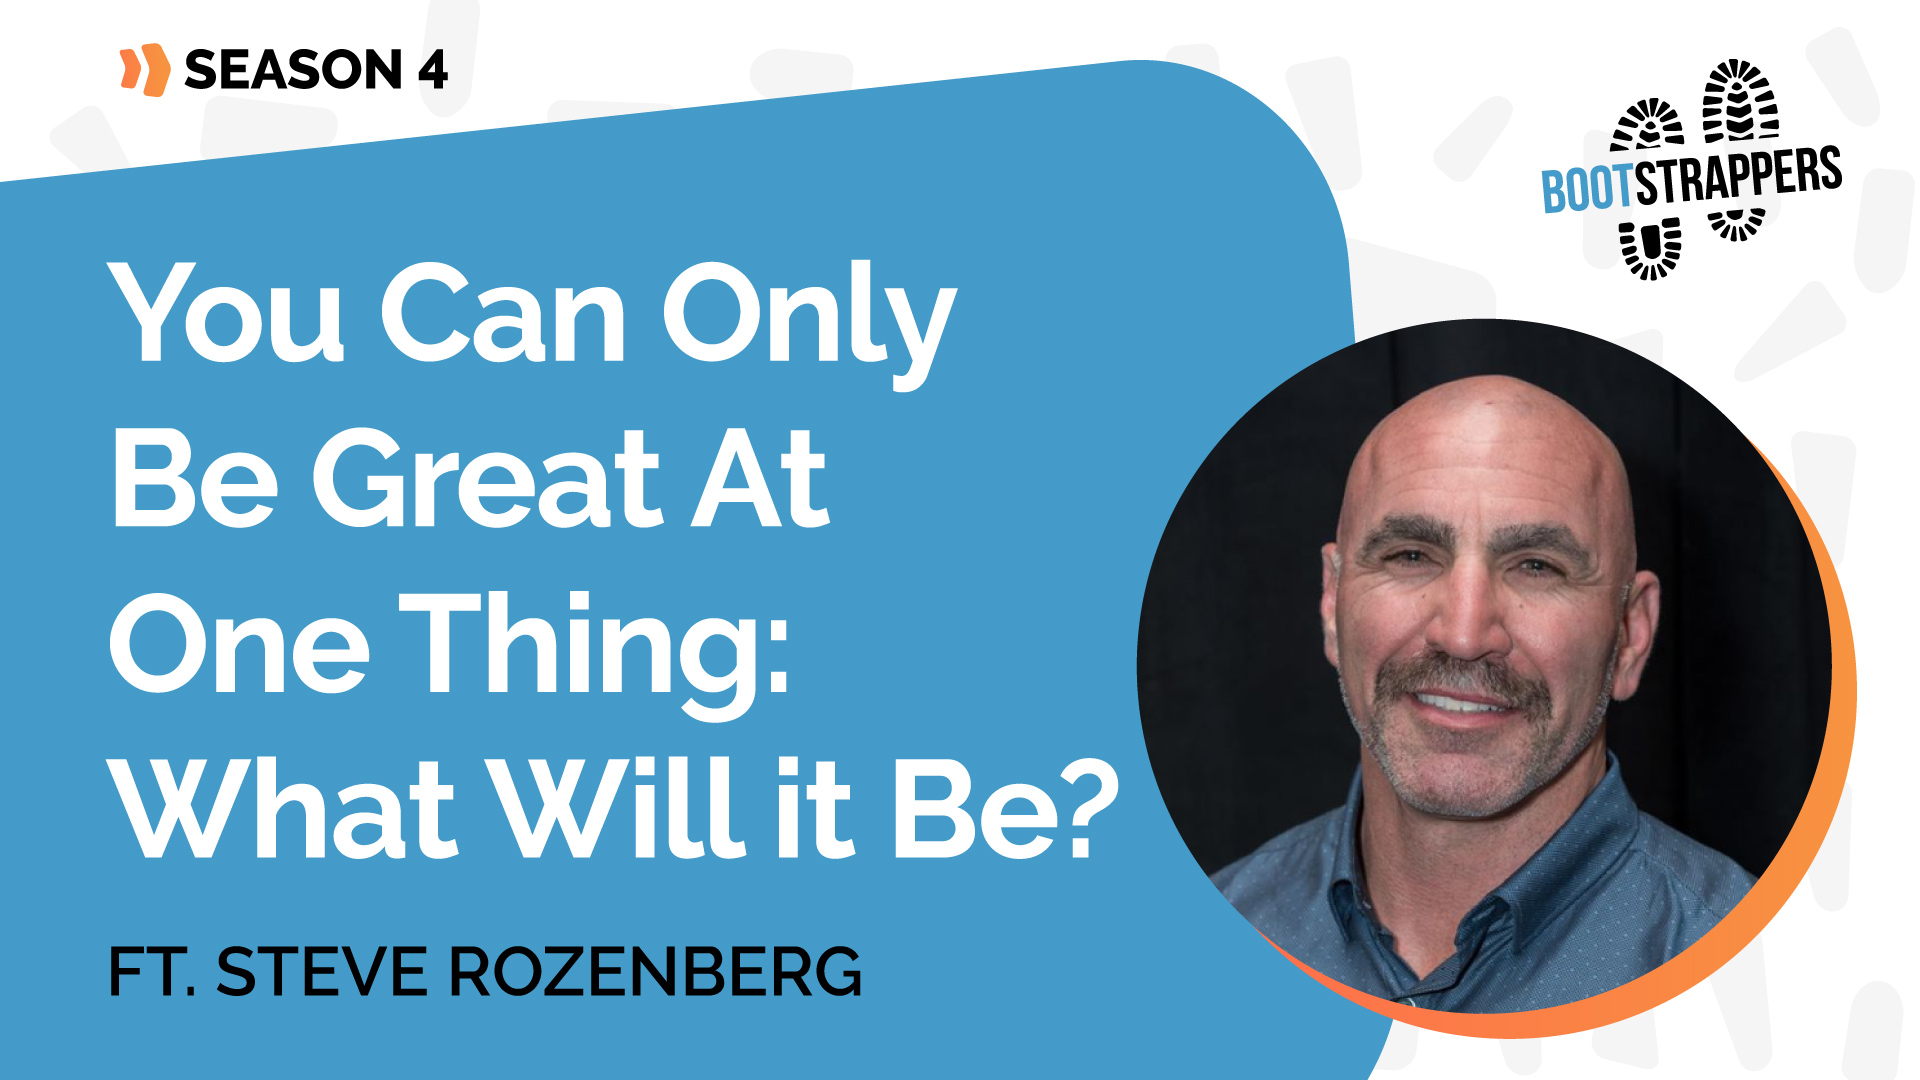 Anequim-Bootstrappers-For-Entrepreneurs-You-Can-Only-Be-Great-At-One-Thing-What-Will-it-Be-Ft-Steve-Rozenberg